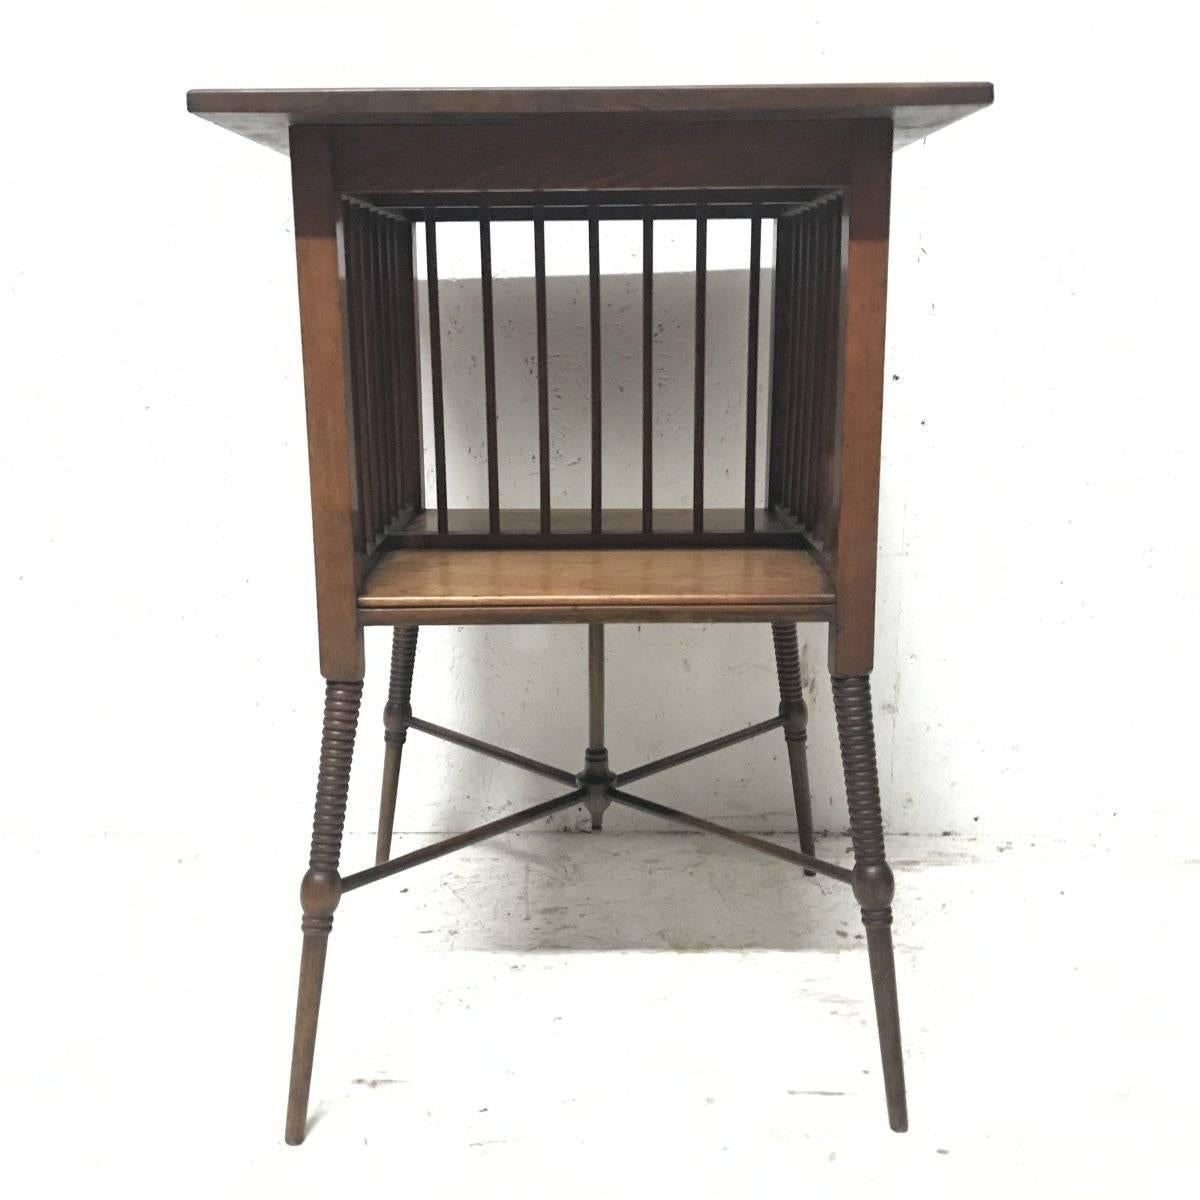 Liberty & Co, a fine Anglo-Japanese Walnut side table in the style of E W Godwin with a spindle gallery below to two sides and a spindle divided lower shelf. The whole on sharply angled and ring turned legs uniting four stretchers with a central